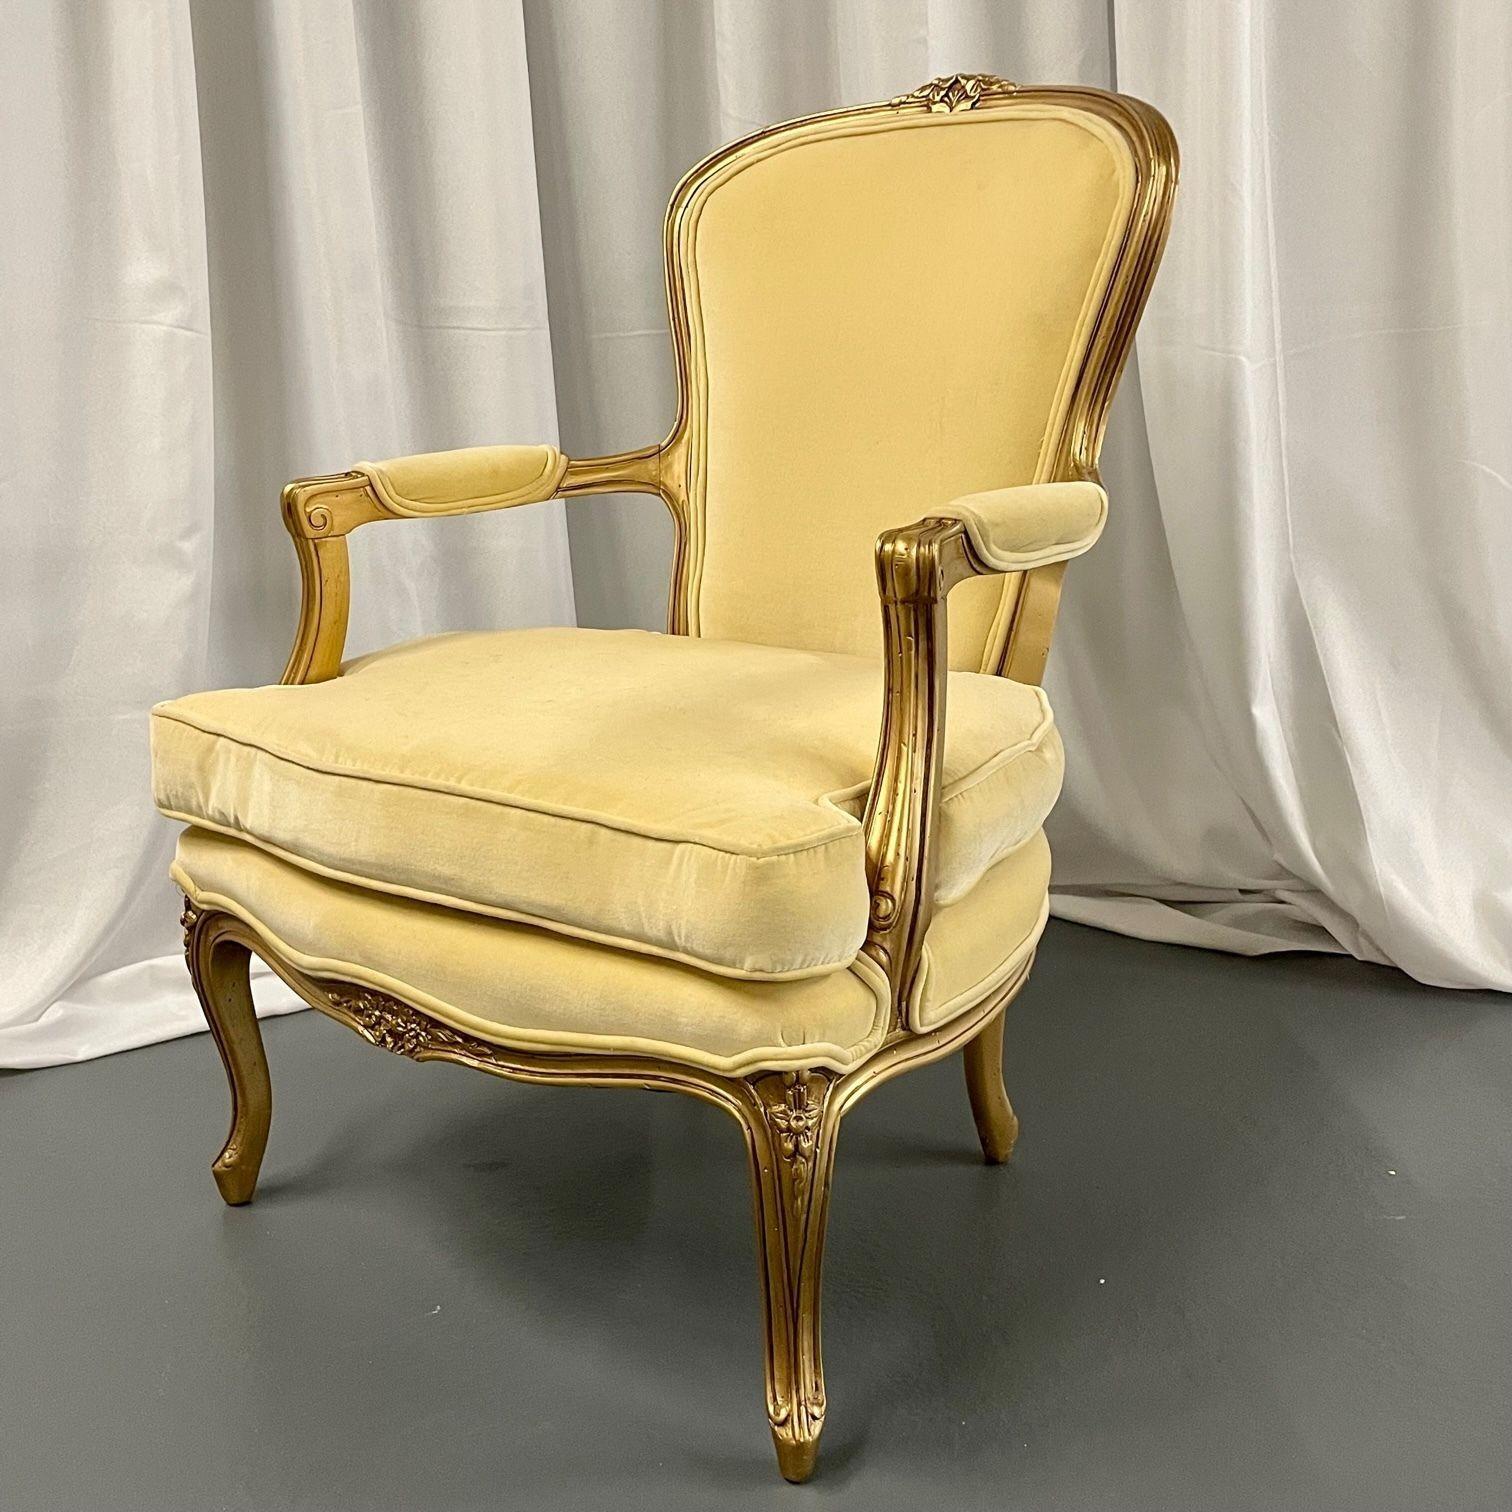 French Louis XVI Jansen Style Bergere,arm / accent chair, velvet, giltwood

Classy and elegant French Louis XVI style arm or lounge chair. Perfect addition for a traditional seating arrangement.
 
Velvet, Giltwood
France, 1940s
 
Seat height: